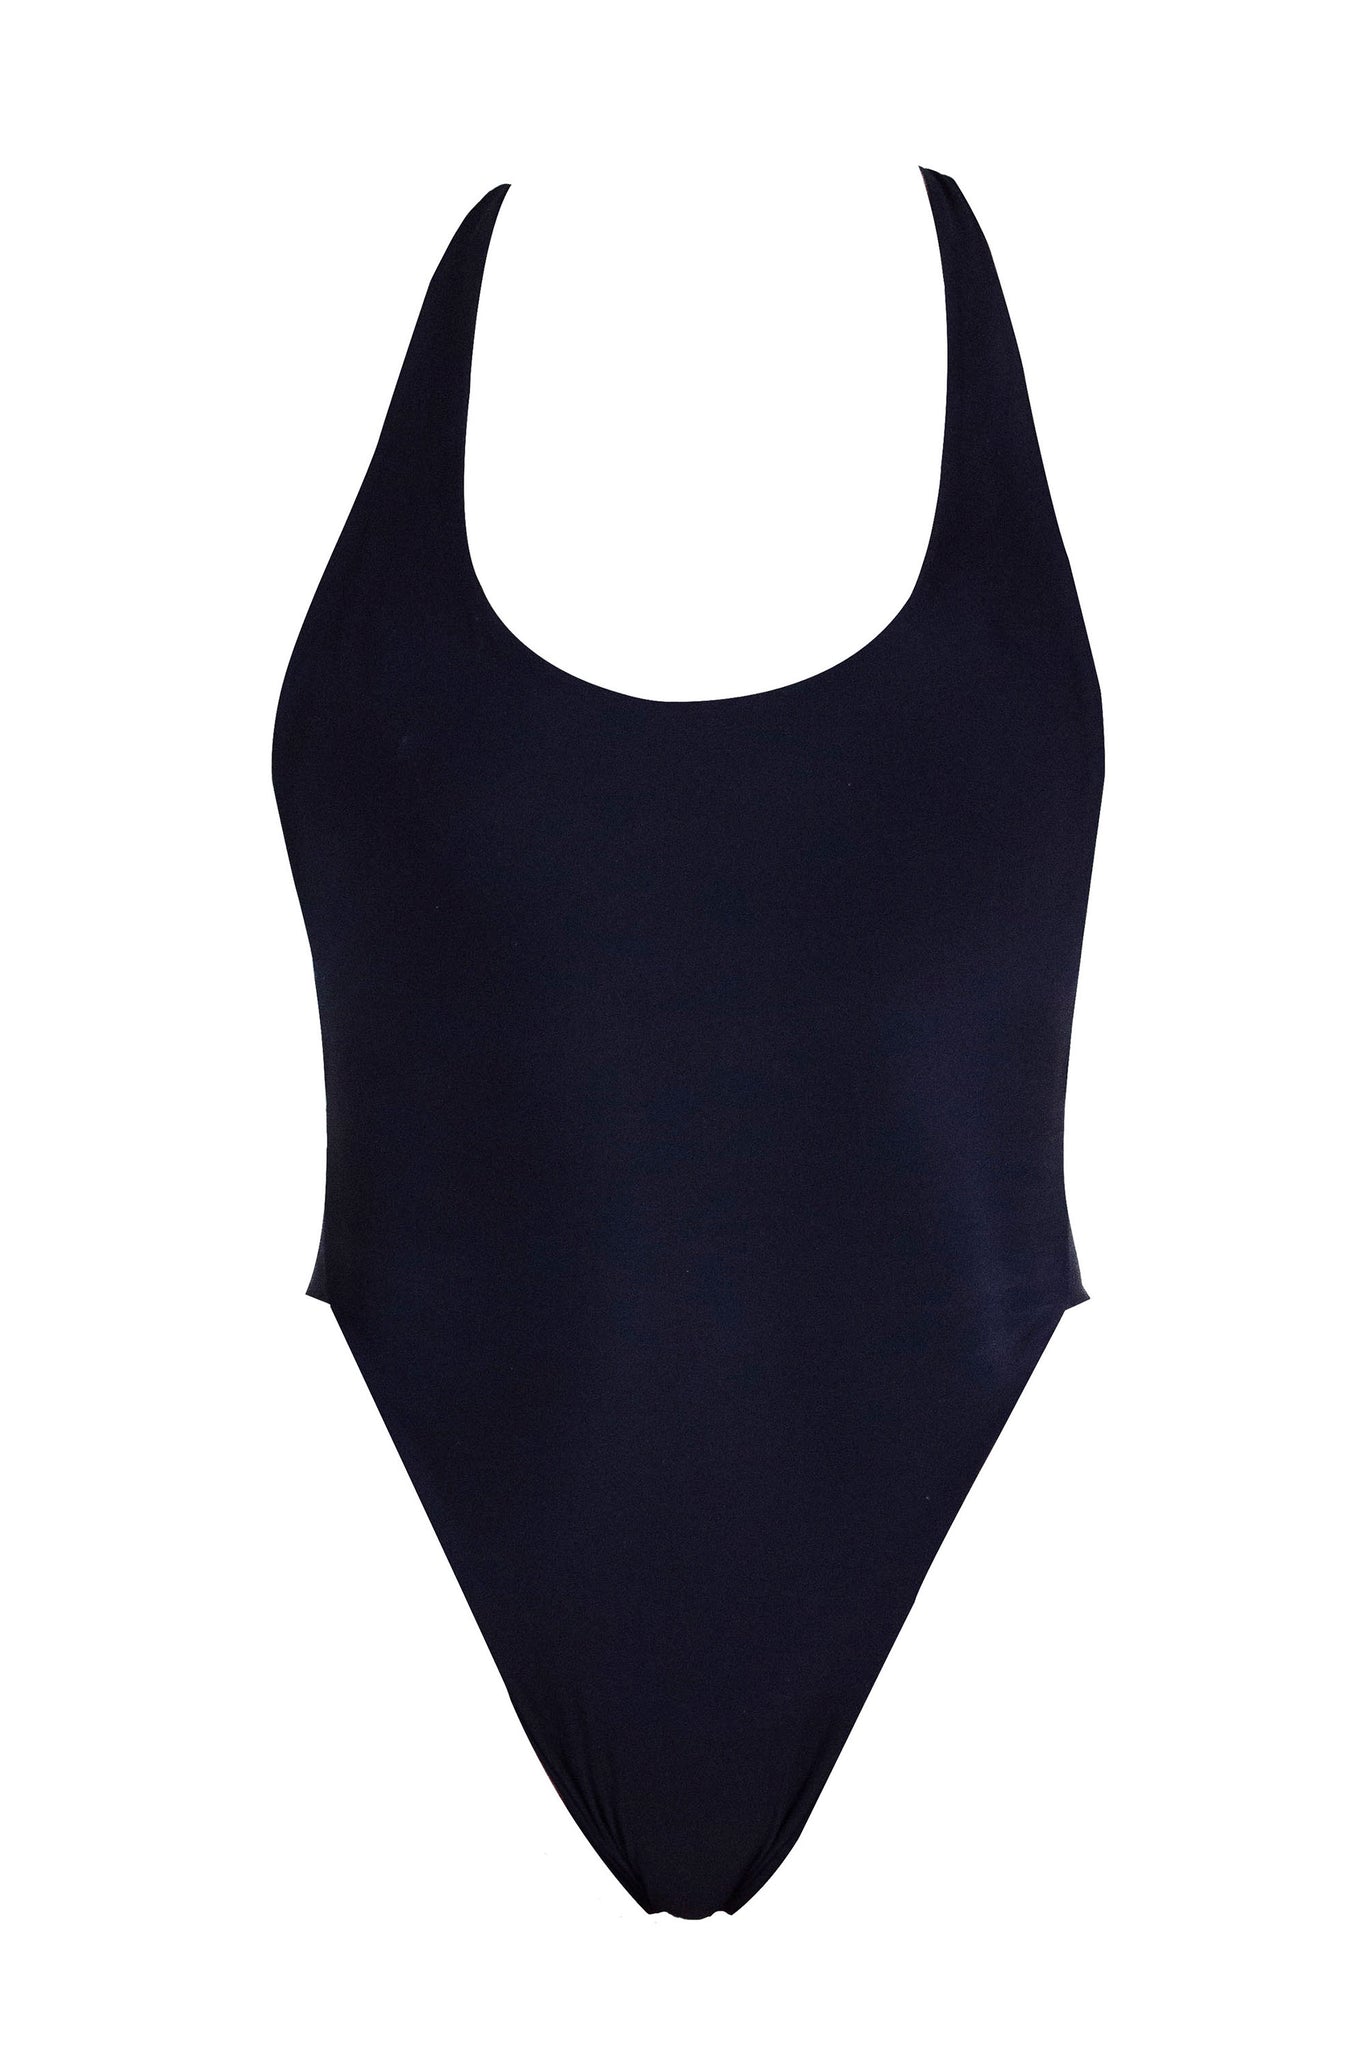 A black high cut one piece swimsuit with thick straps.